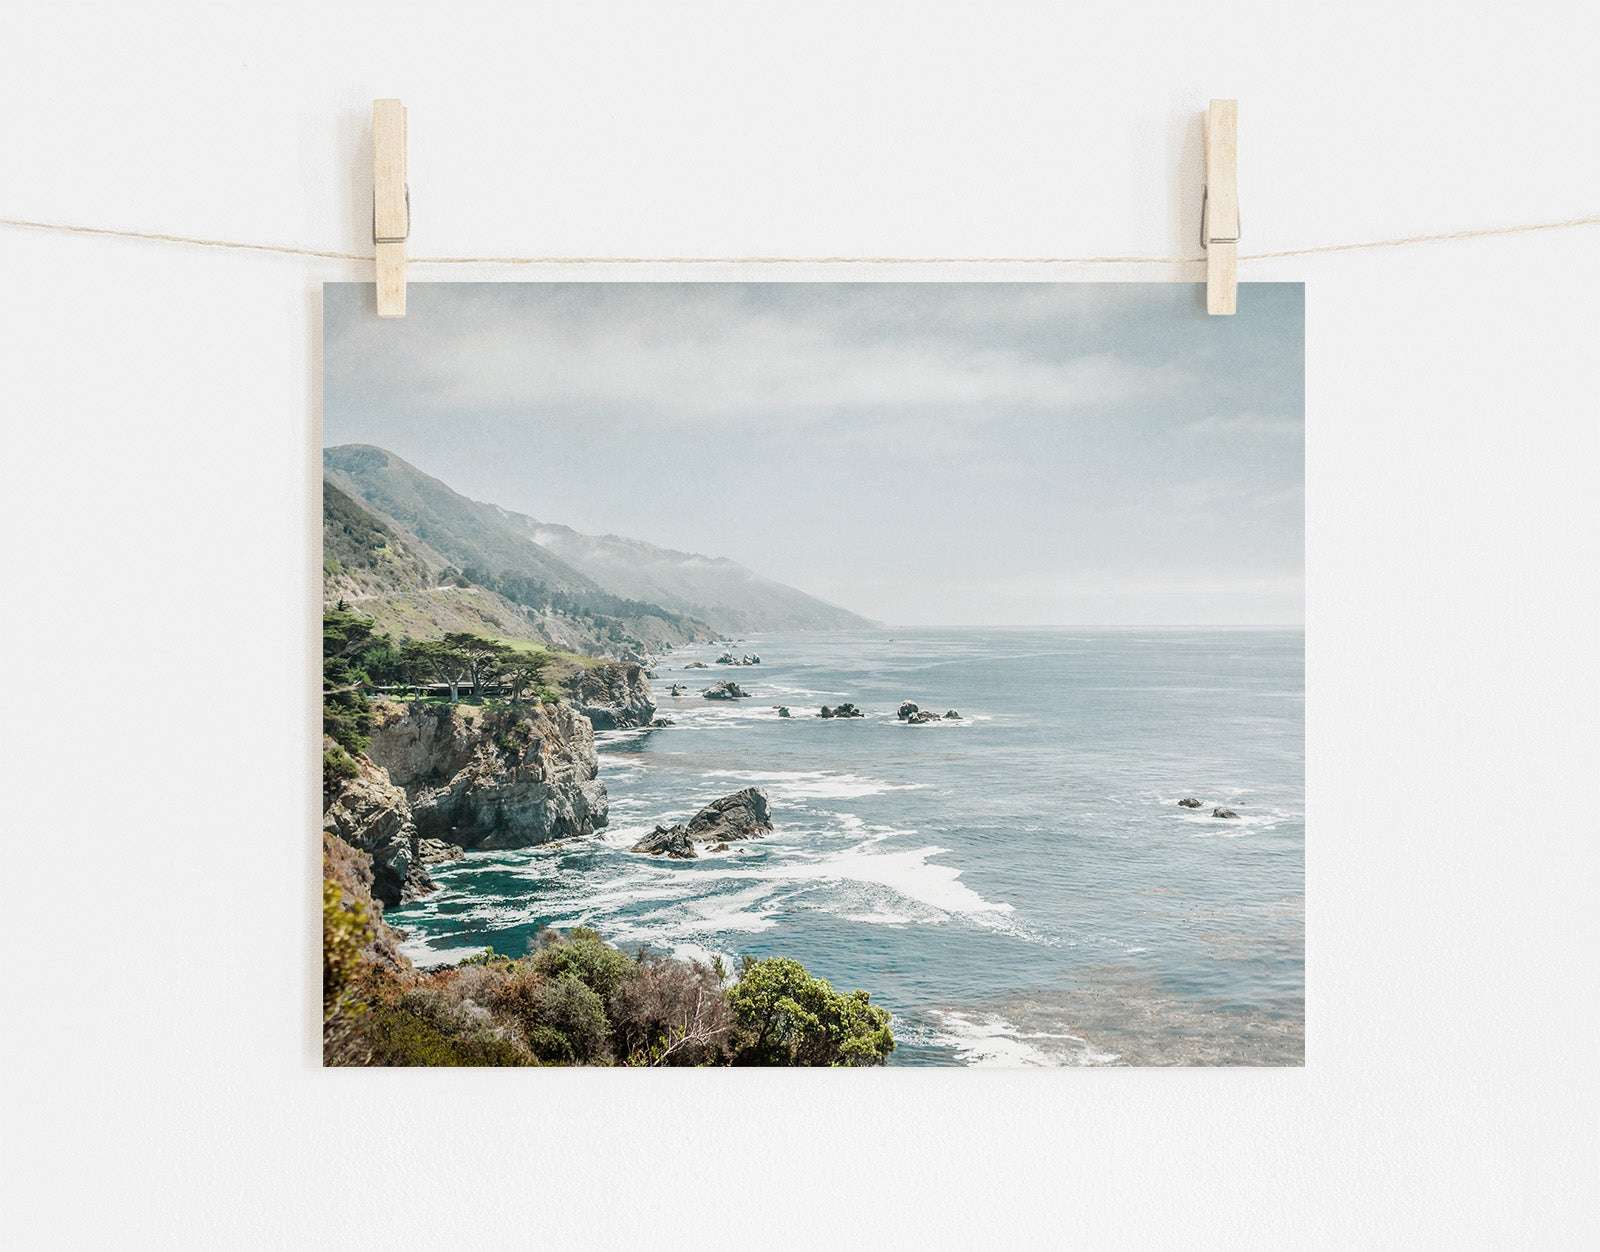 A photo clipped to a line, displaying a scenic view of Offley Green's 'Rocky Rocks' landscape print of Big Sur's rugged coastline with cliffs and ocean, wrapped in a gentle mist, under a pale sky.